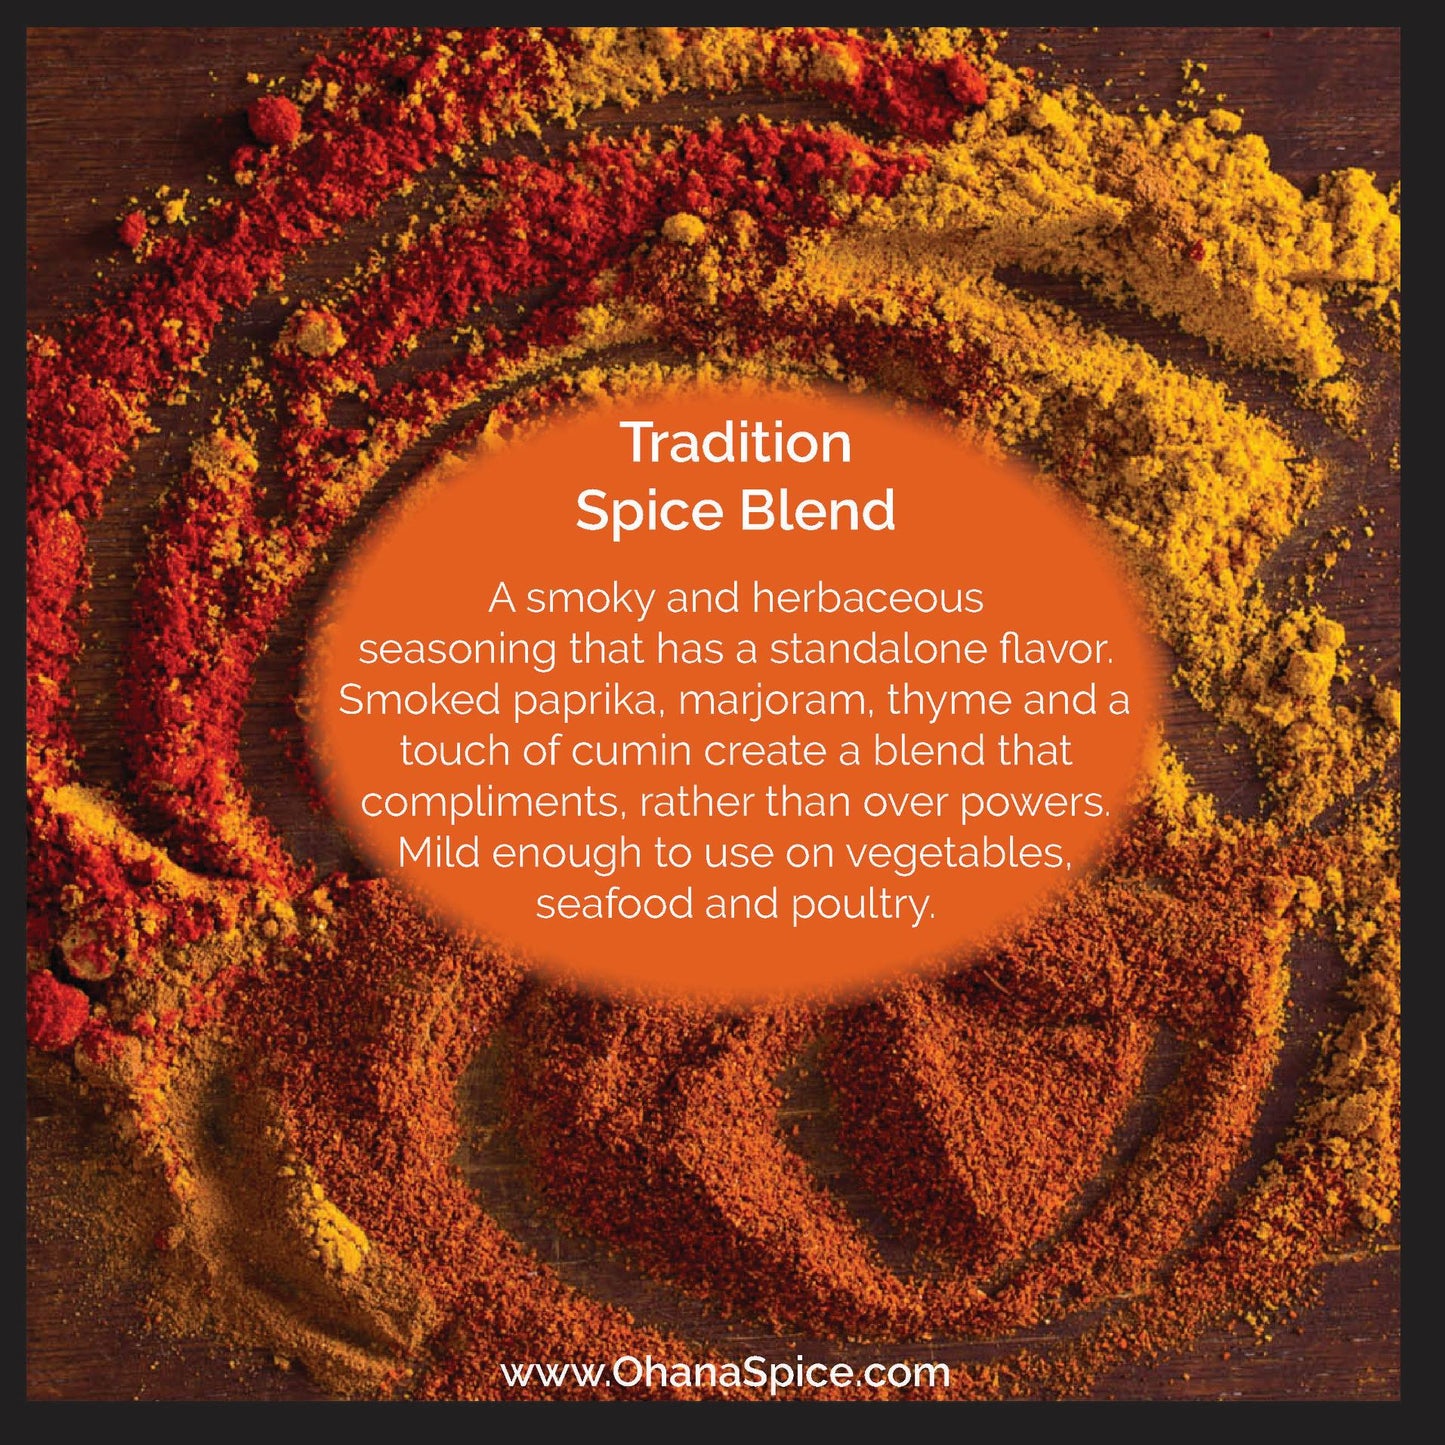 Tradition Spice Blend